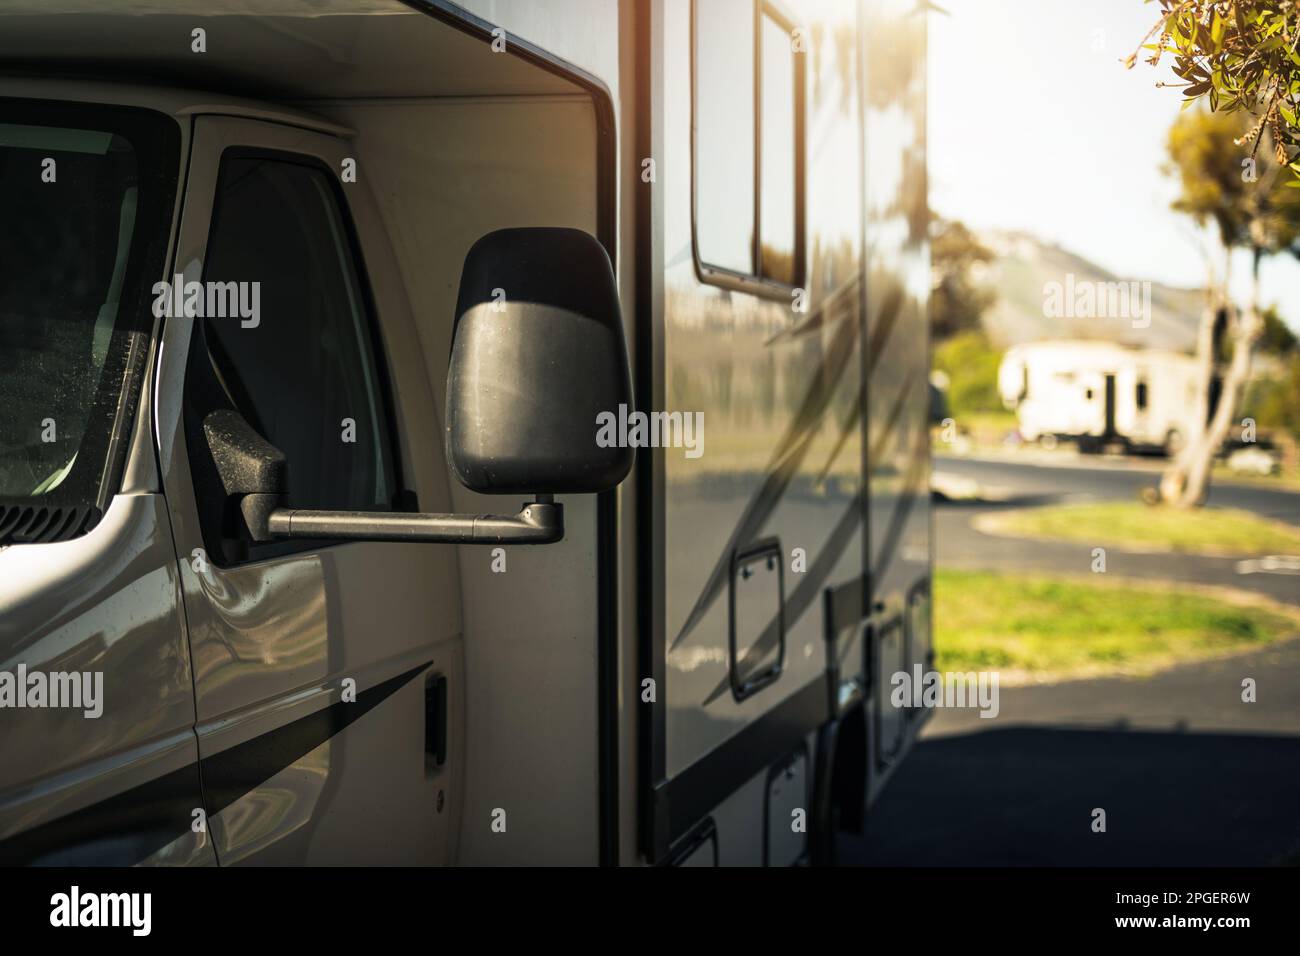 Class C Motorhome RV Vacation on the Road. Recreational Vehicle Theme. Stock Photo